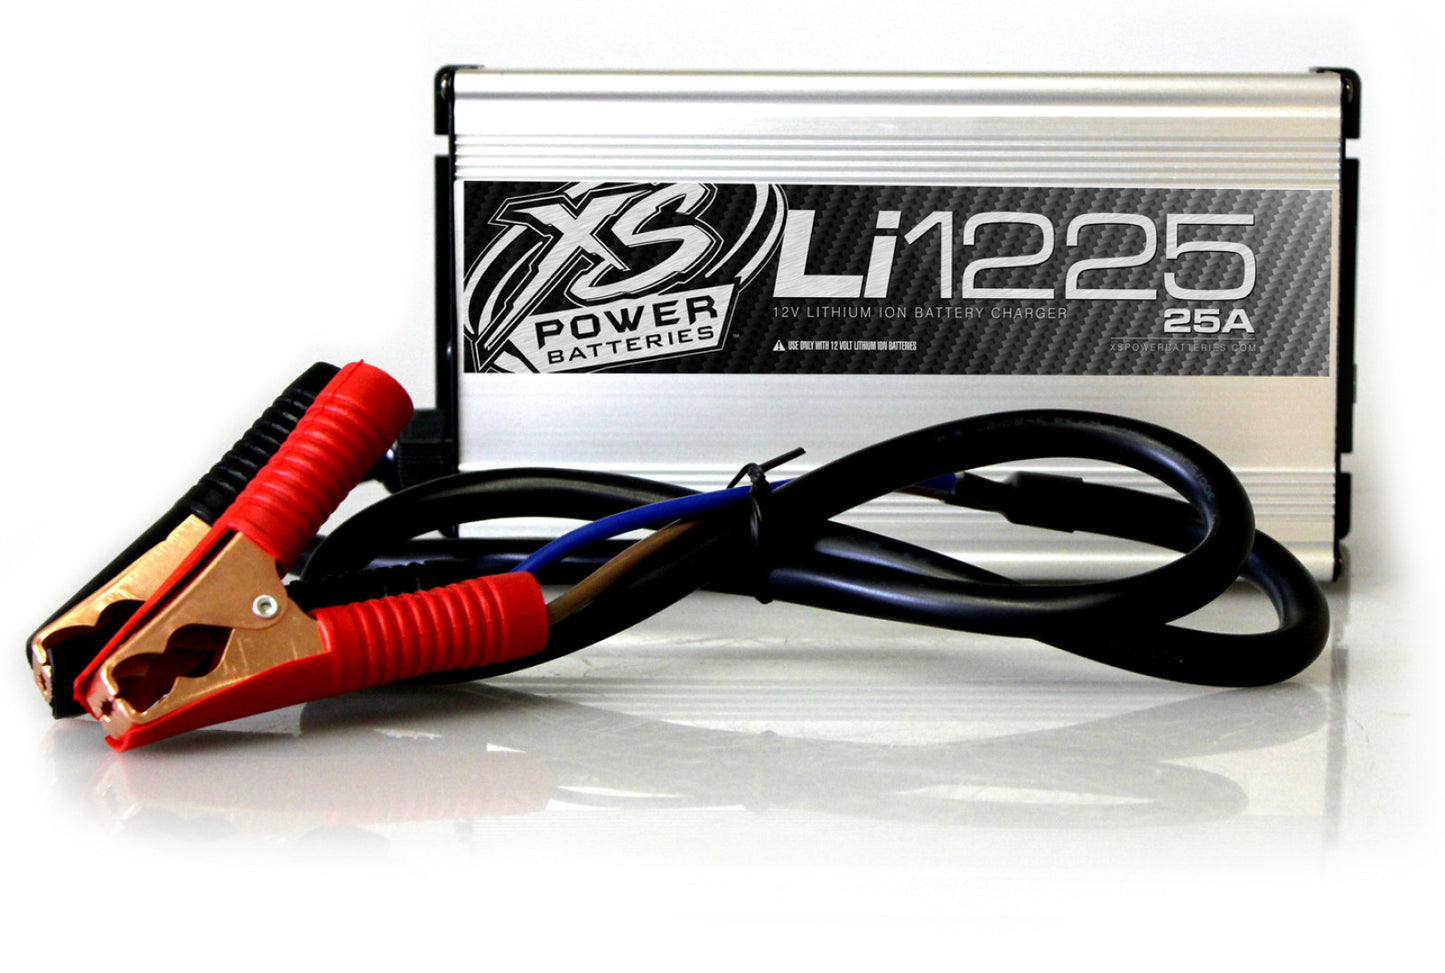 XS Power Batteries 12V High Frequency Lithium IntelliCharger, 25A